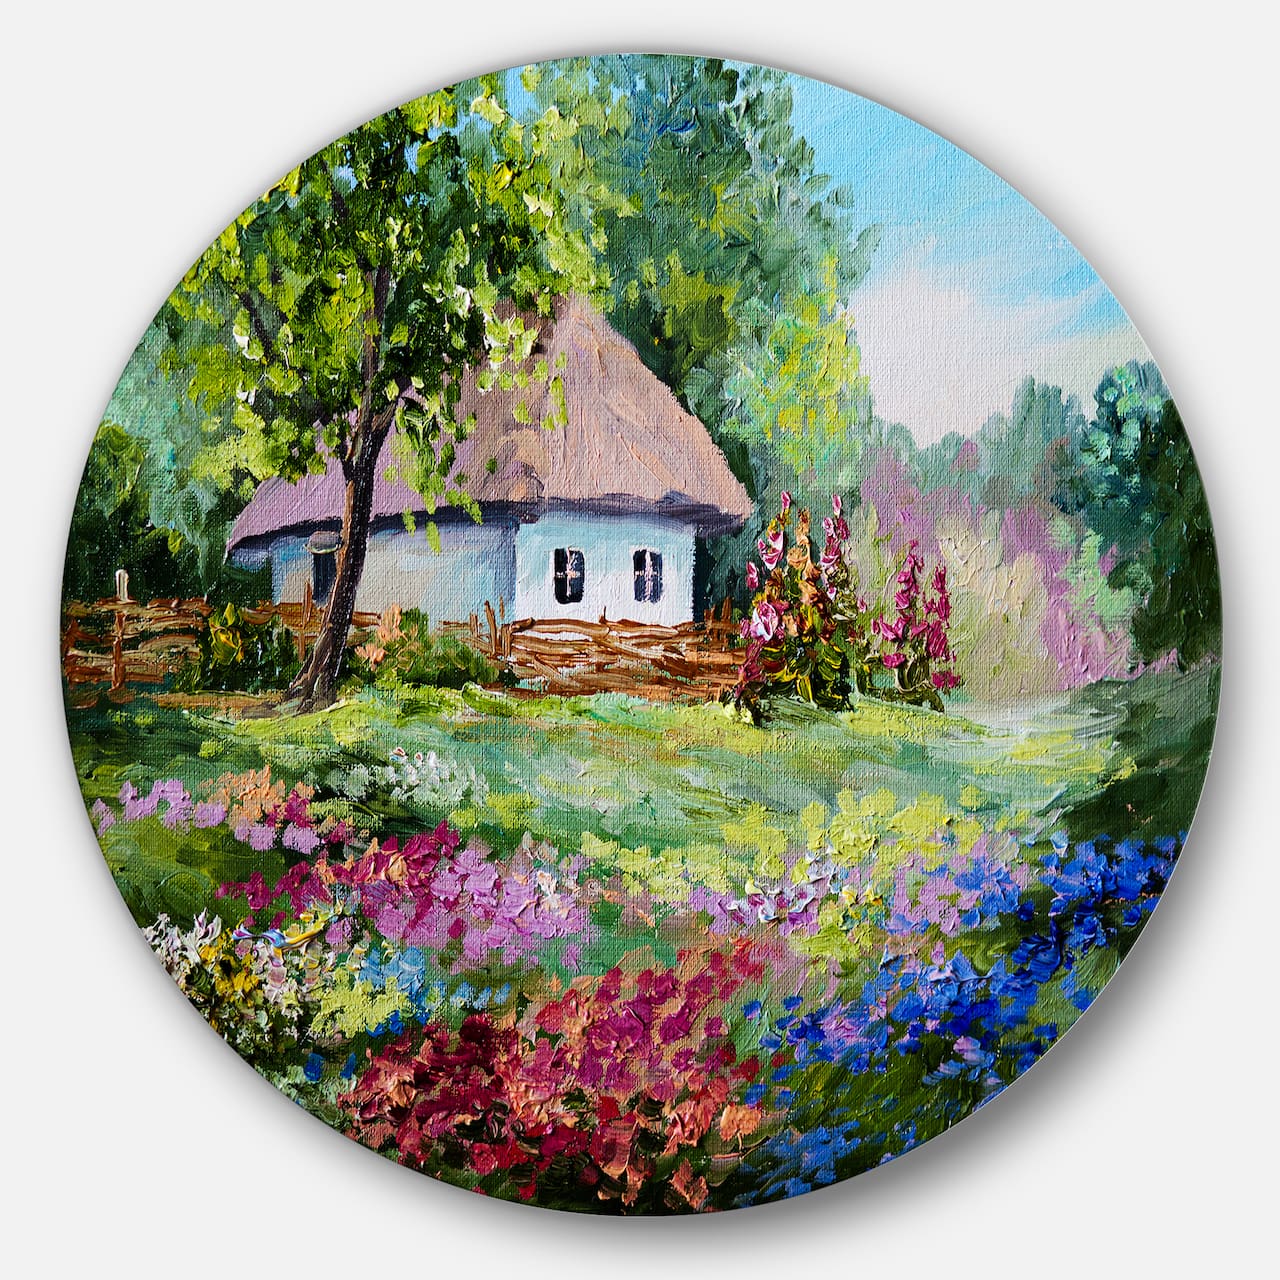 Designart - House in the Village Oil Painting&#x27; Landscape Circle Metal Wall Art